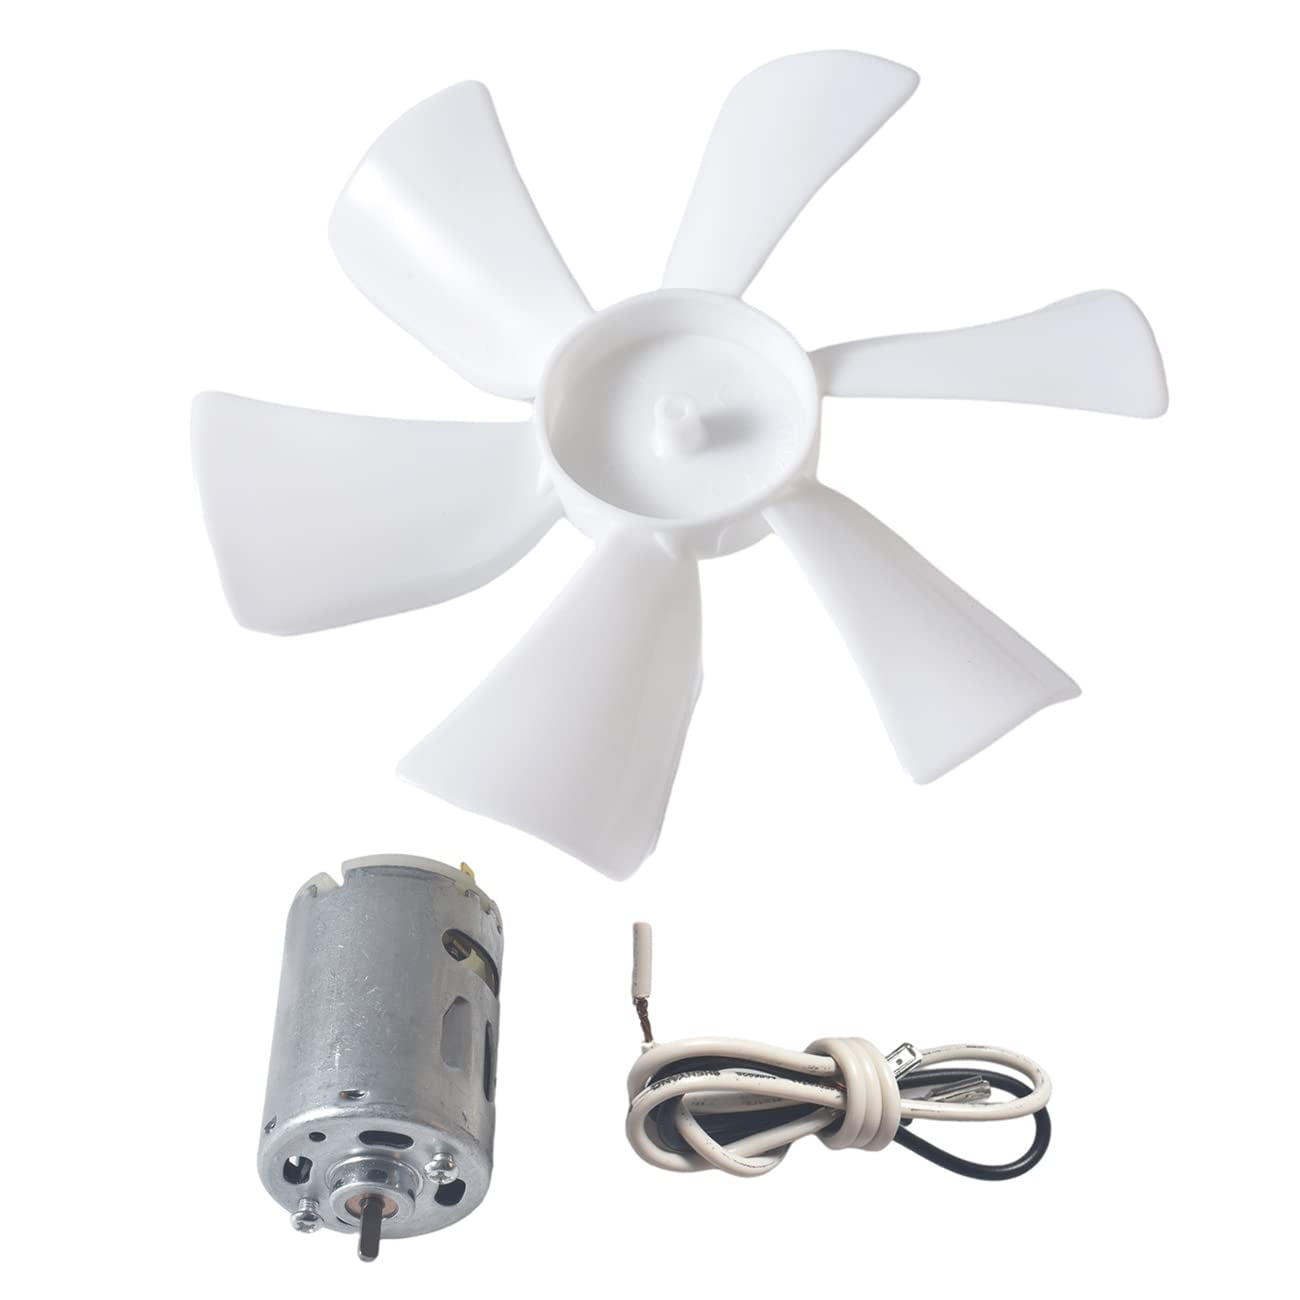 Hike Crew 14” RV Roof Vent Fan, 12V, 10-Speed RV Vent Fan with Remote and  Rain Sensor, White Lid 